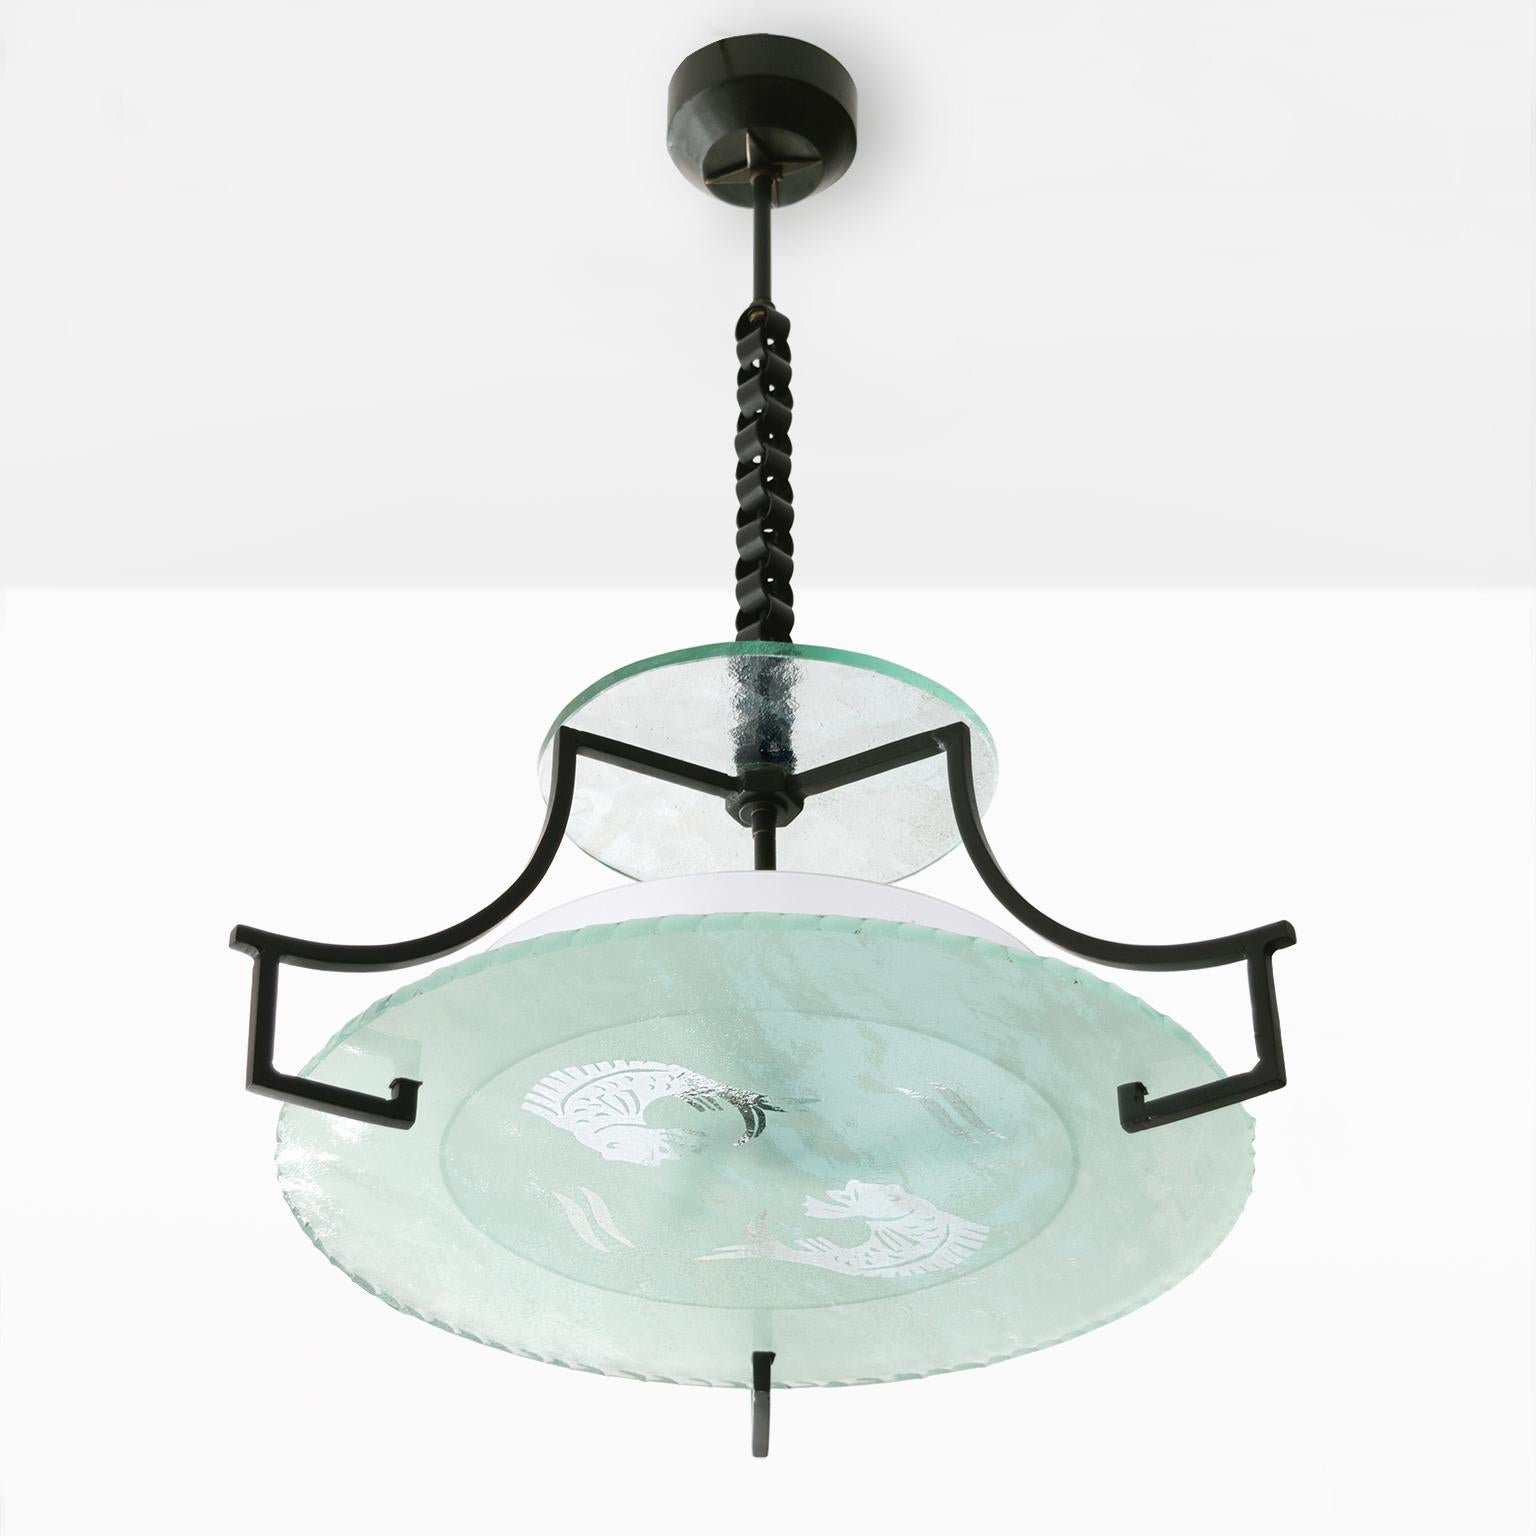 A Swedish Grace, Art Deco period etched glass and wrought iron chandelier. The fixture has a large acid etched flat glass shade with two fish and stylized wave designs. A tripod iron frame holds a second glass shade suspended above a frosted white